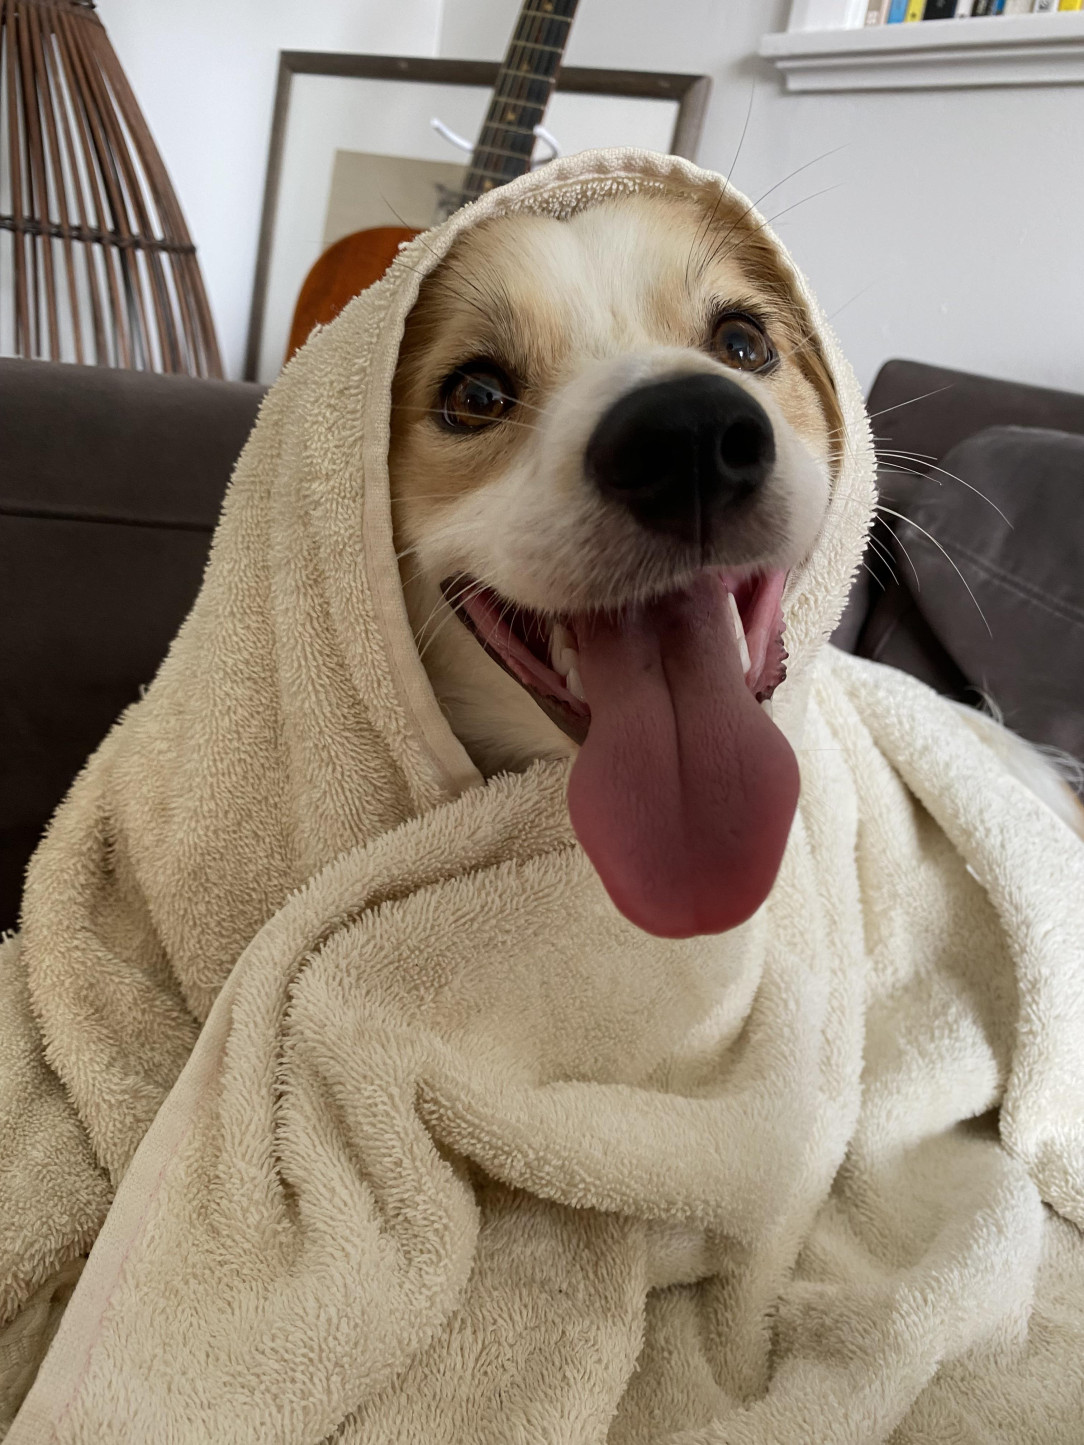 This is Duster drying off after a walk in the rain (his favourite)! This is his happiest happy face